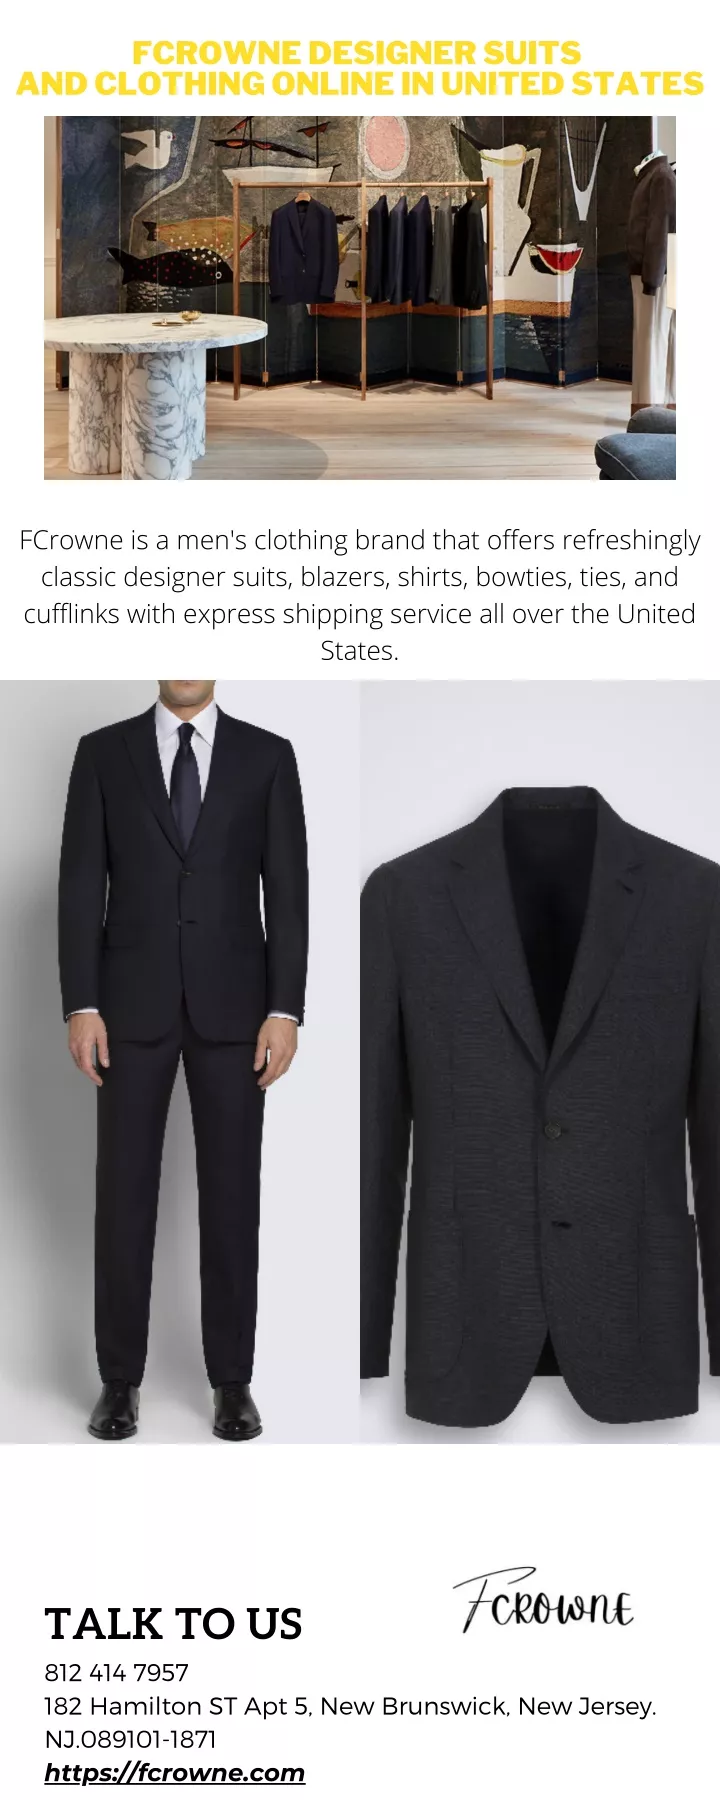 fcrowne designer suits and clothing online